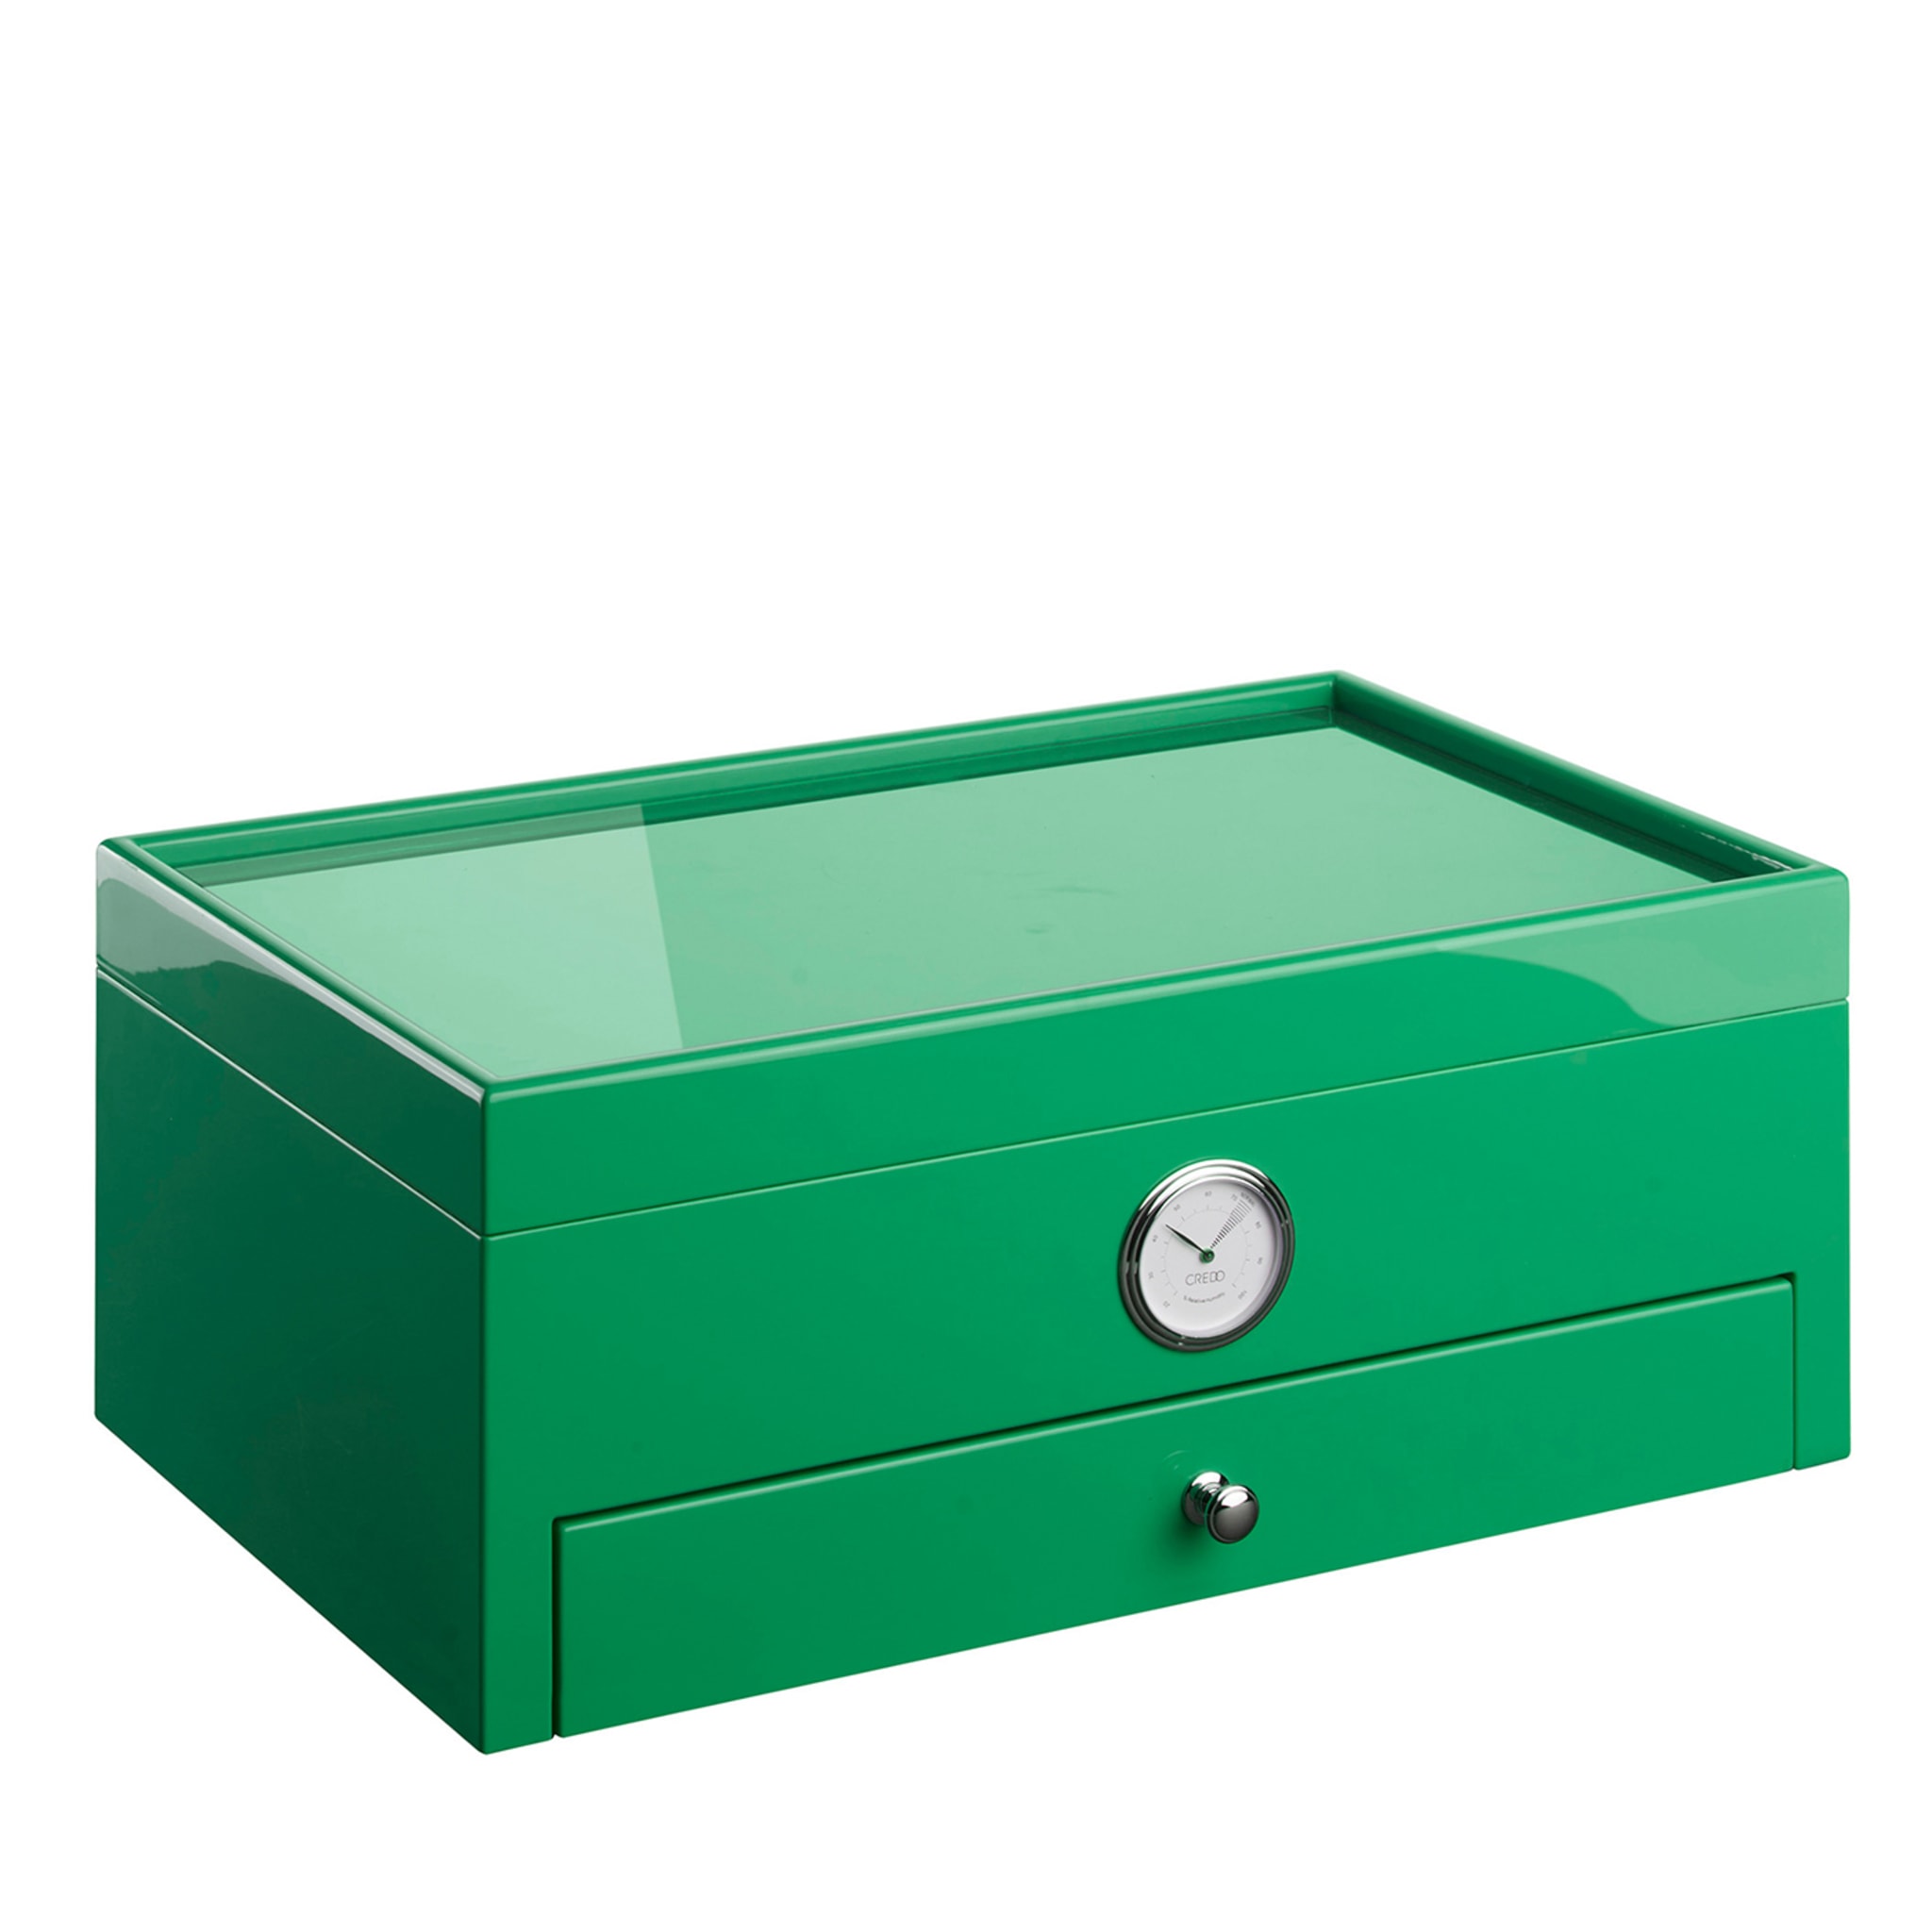 Full Color Green Humidor (Special Club Edition)  - Main view